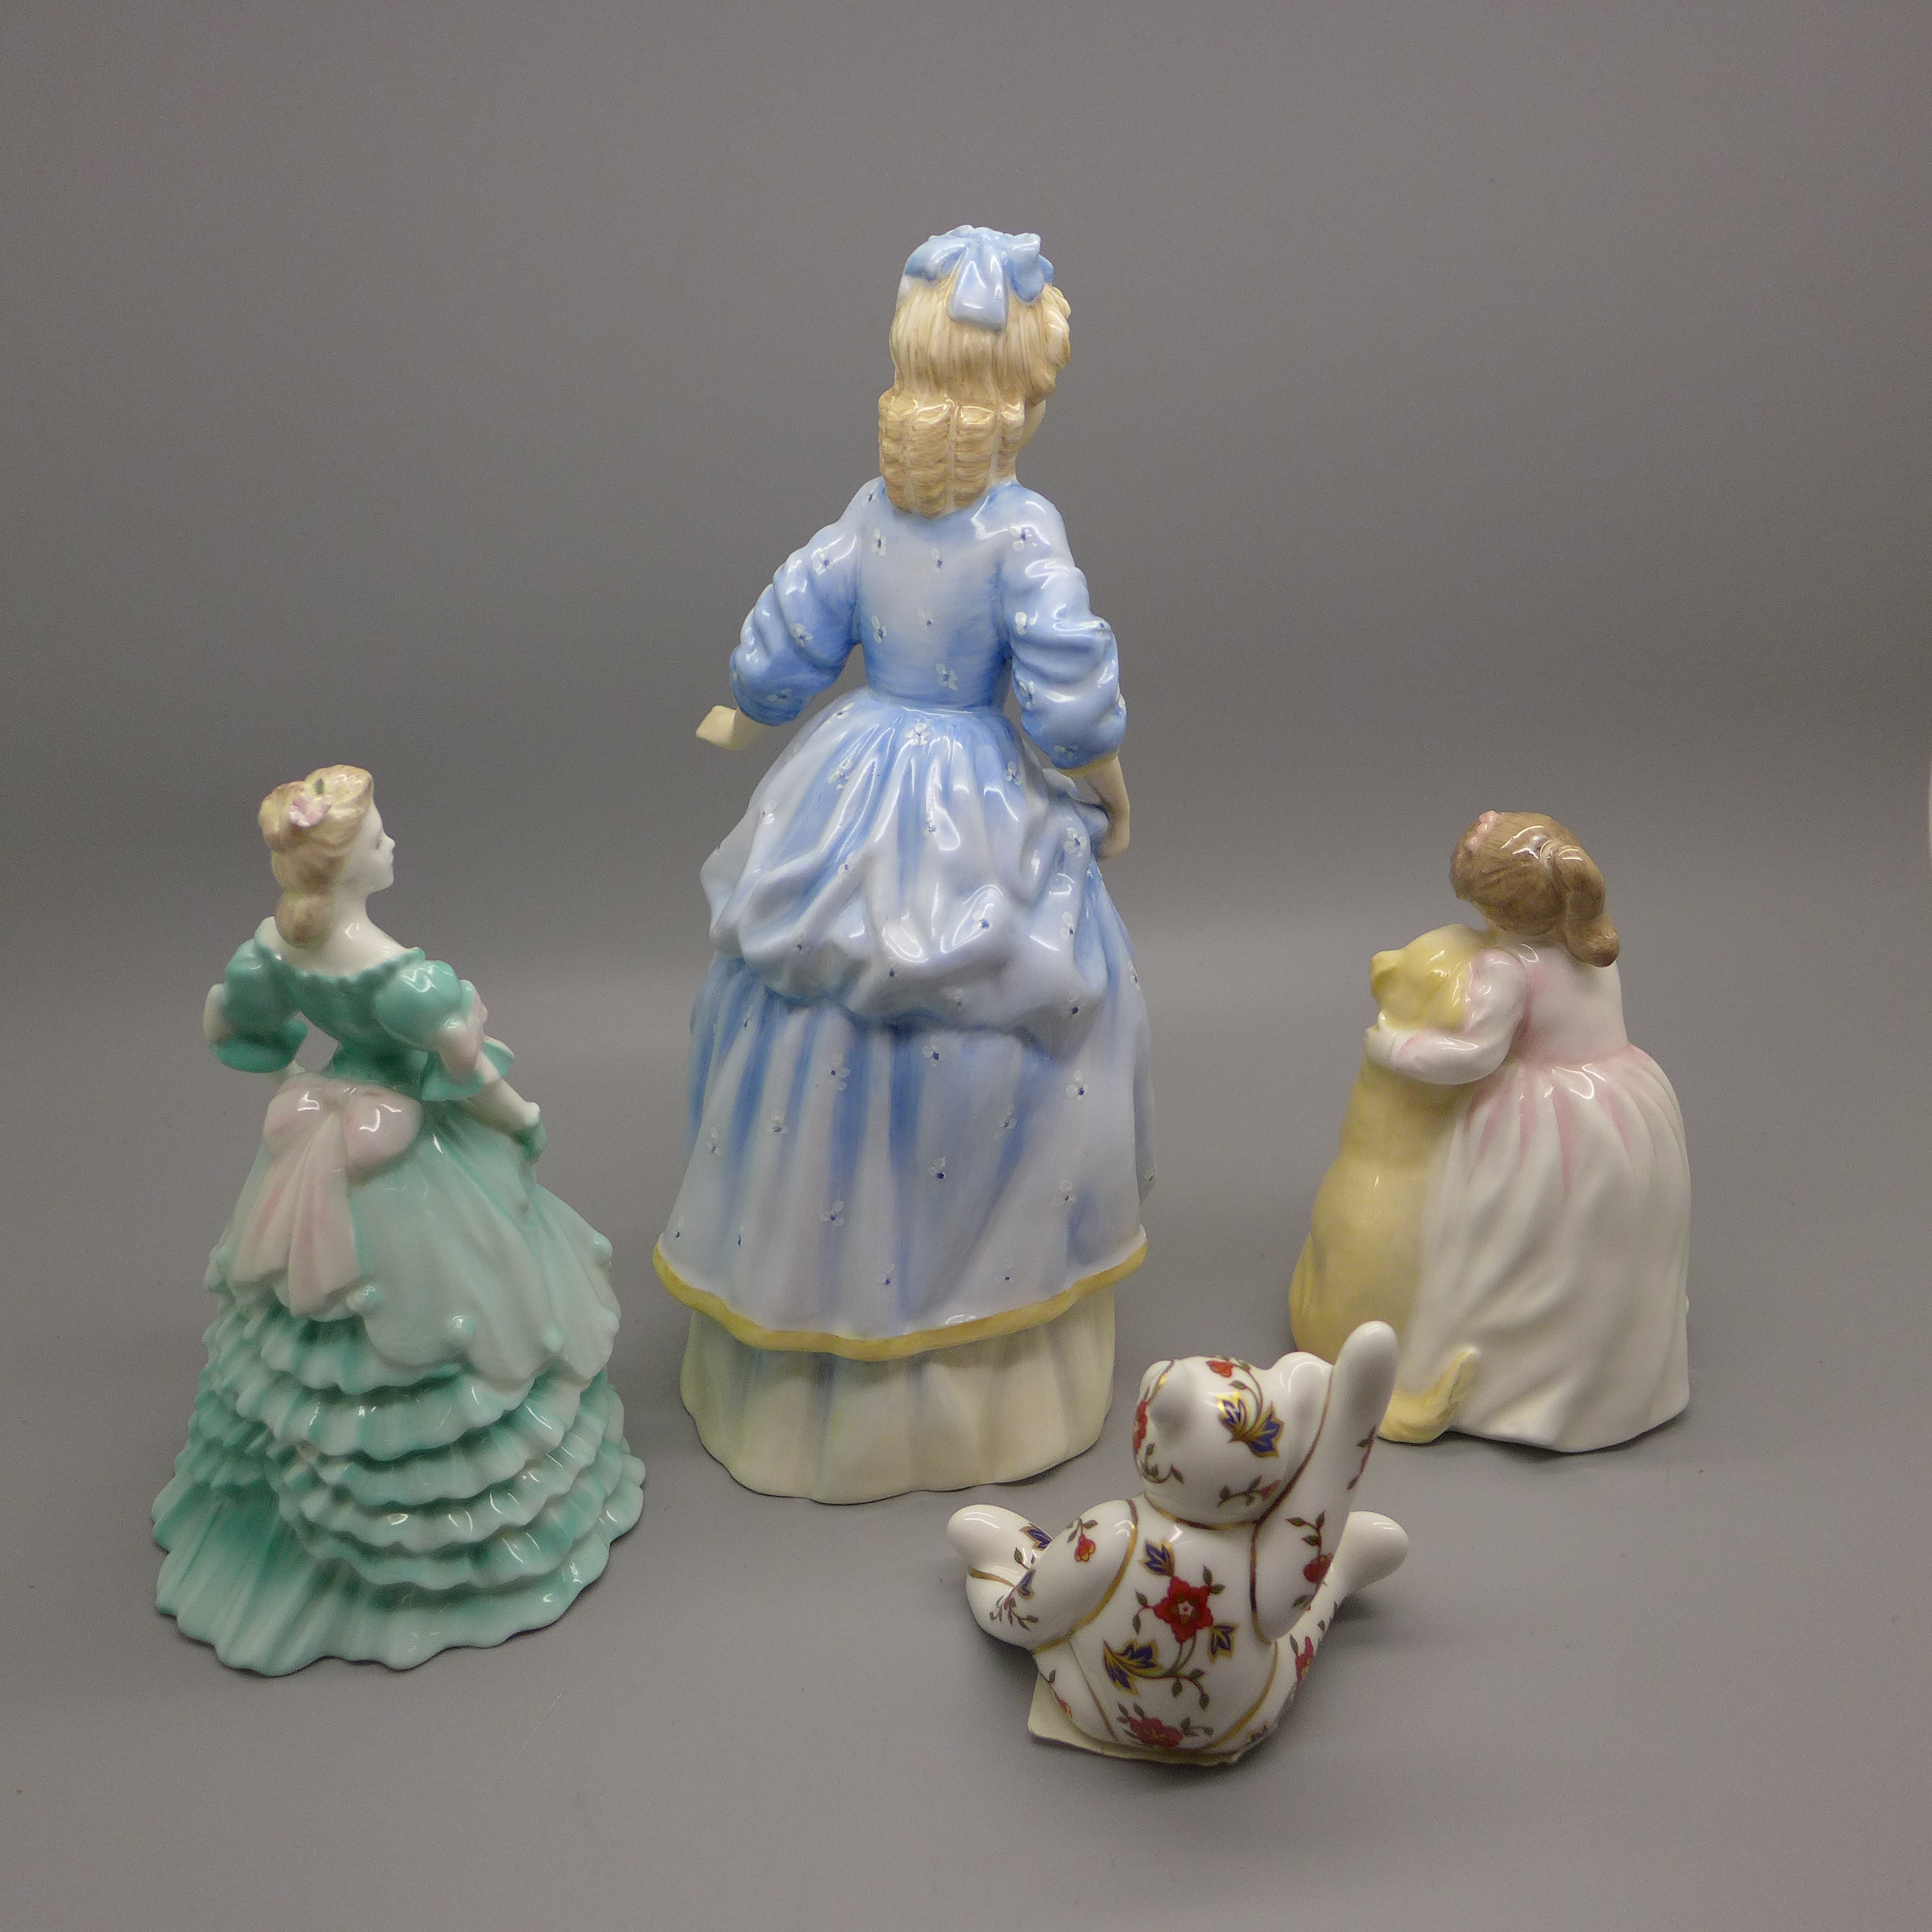 Two Royal Doulton figures, a Coalport figure and a Royal Crown Derby Teddy bear paperweight - Image 4 of 5